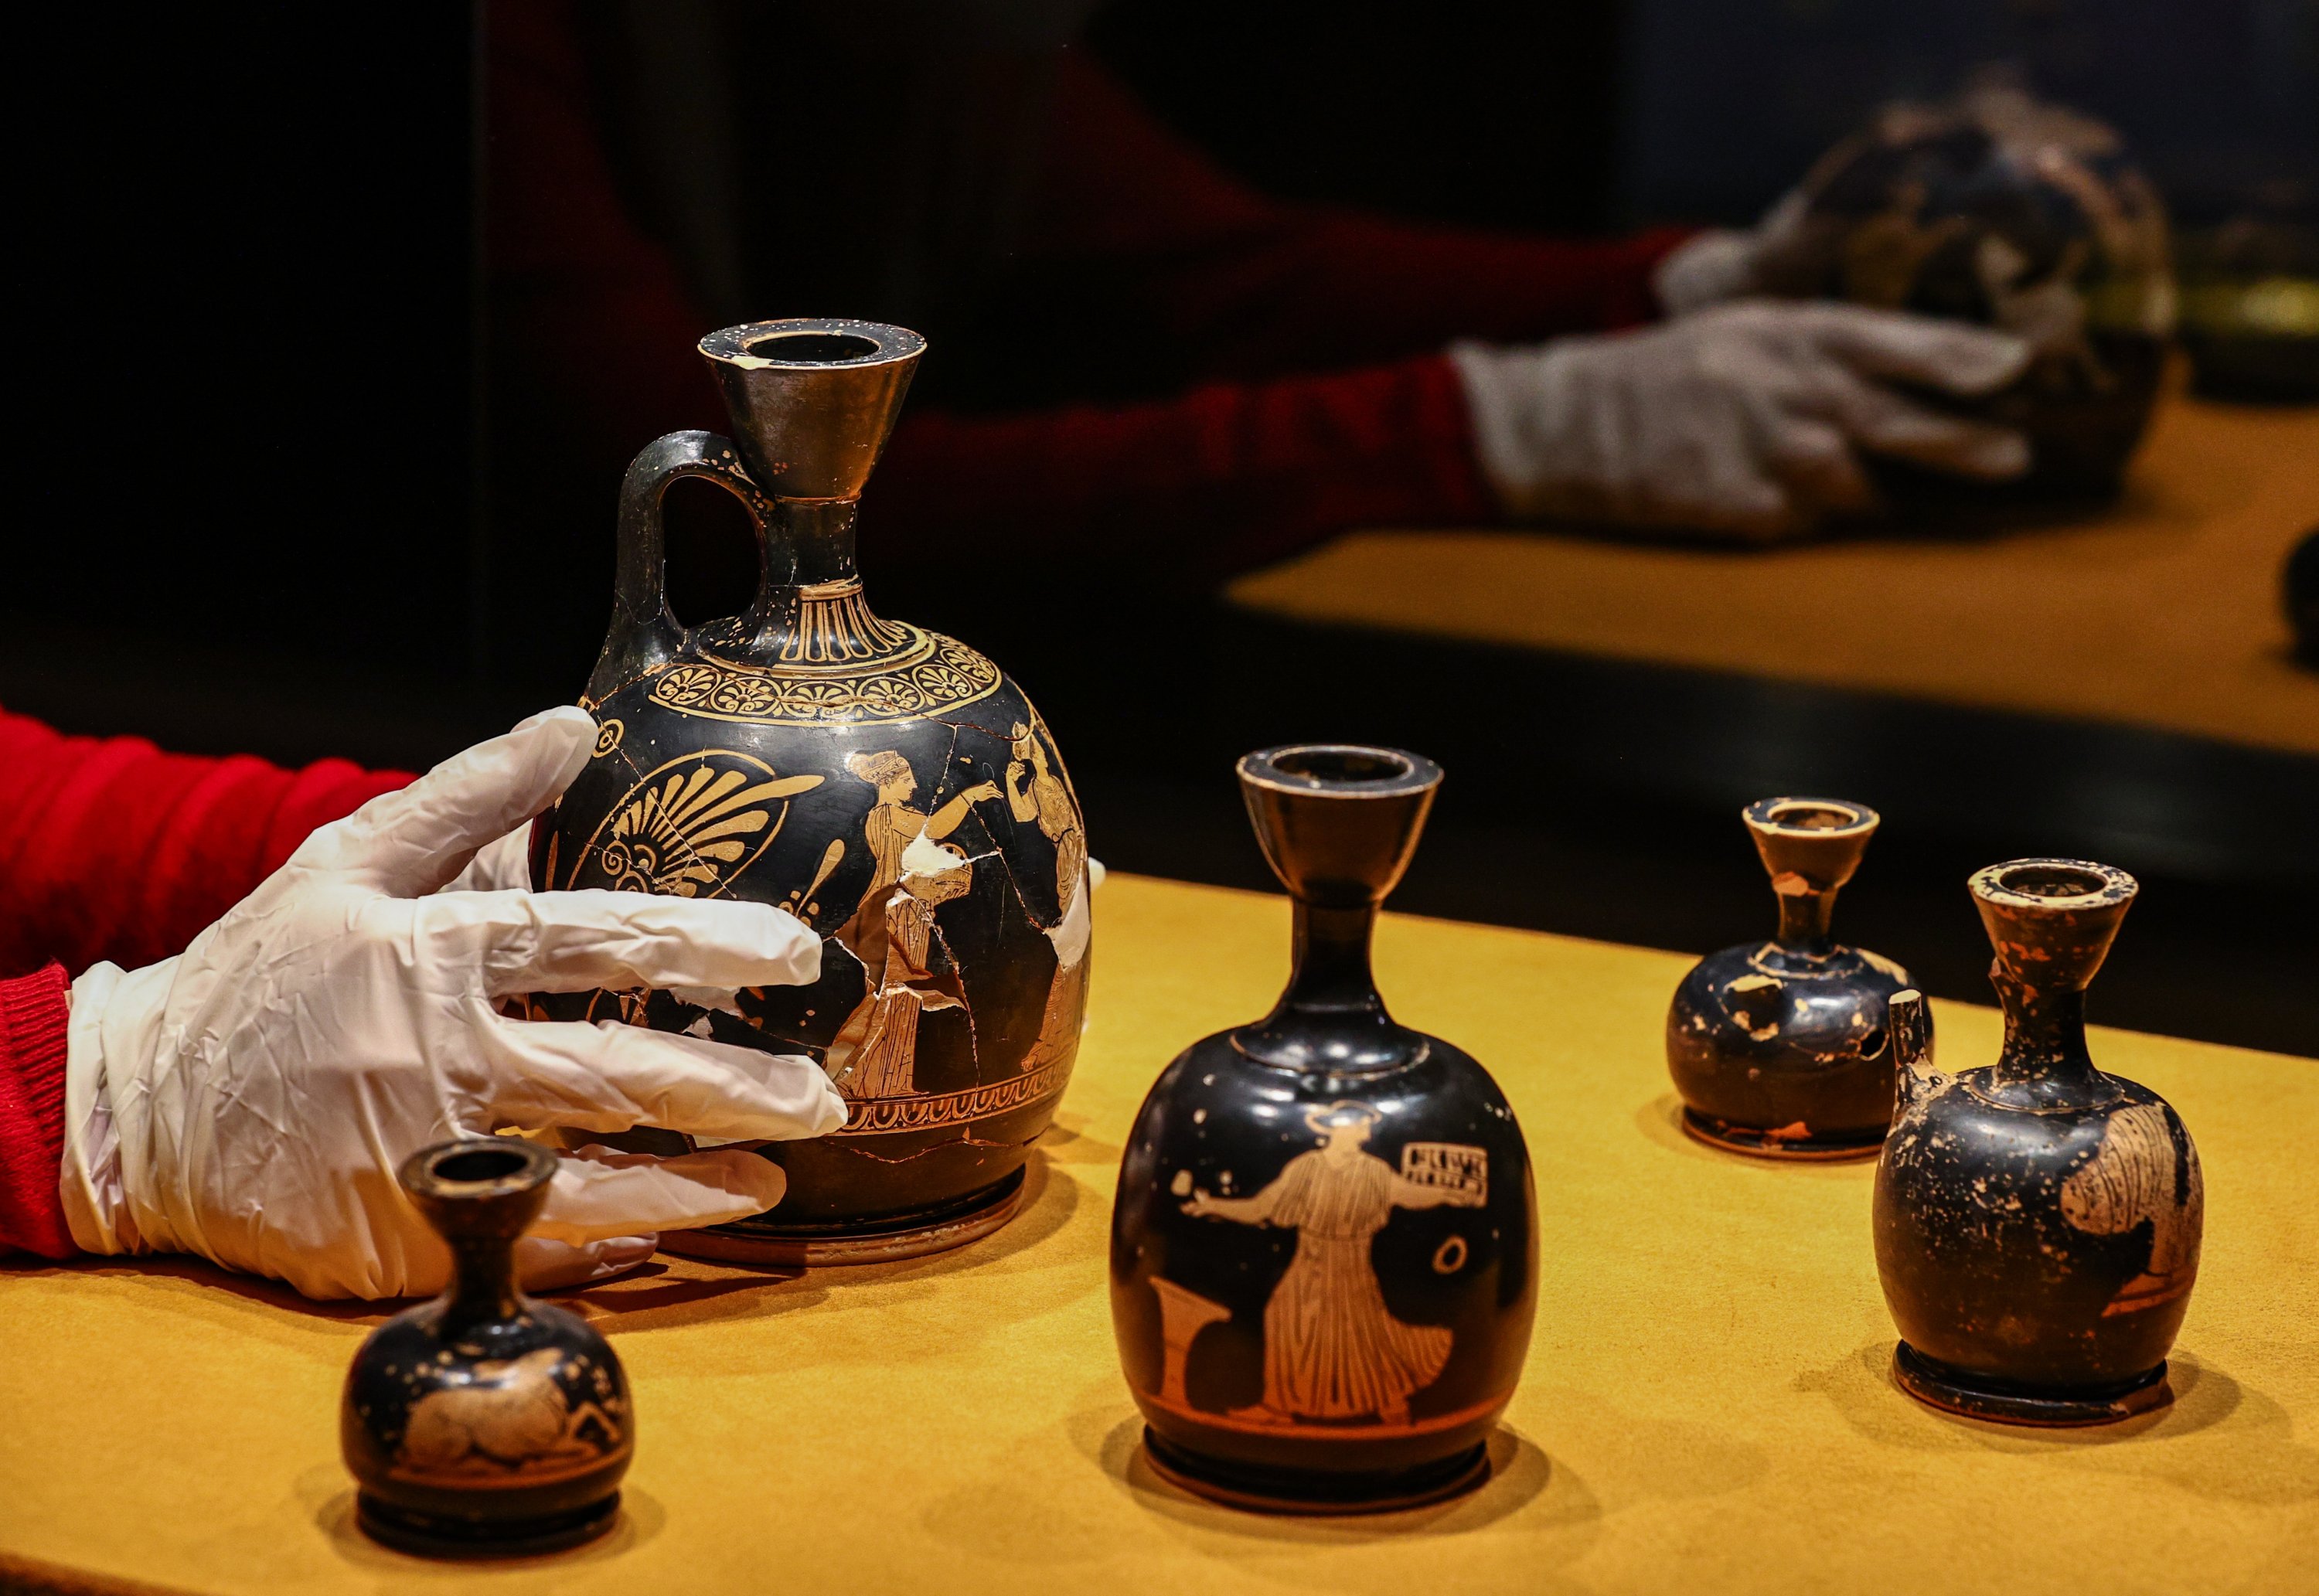 An attendant places an ancient perfume bottle among others on display at the Izmir Archaeological Museum, Izmir, western Turkey, Feb. 11, 2021. (AA Photo)